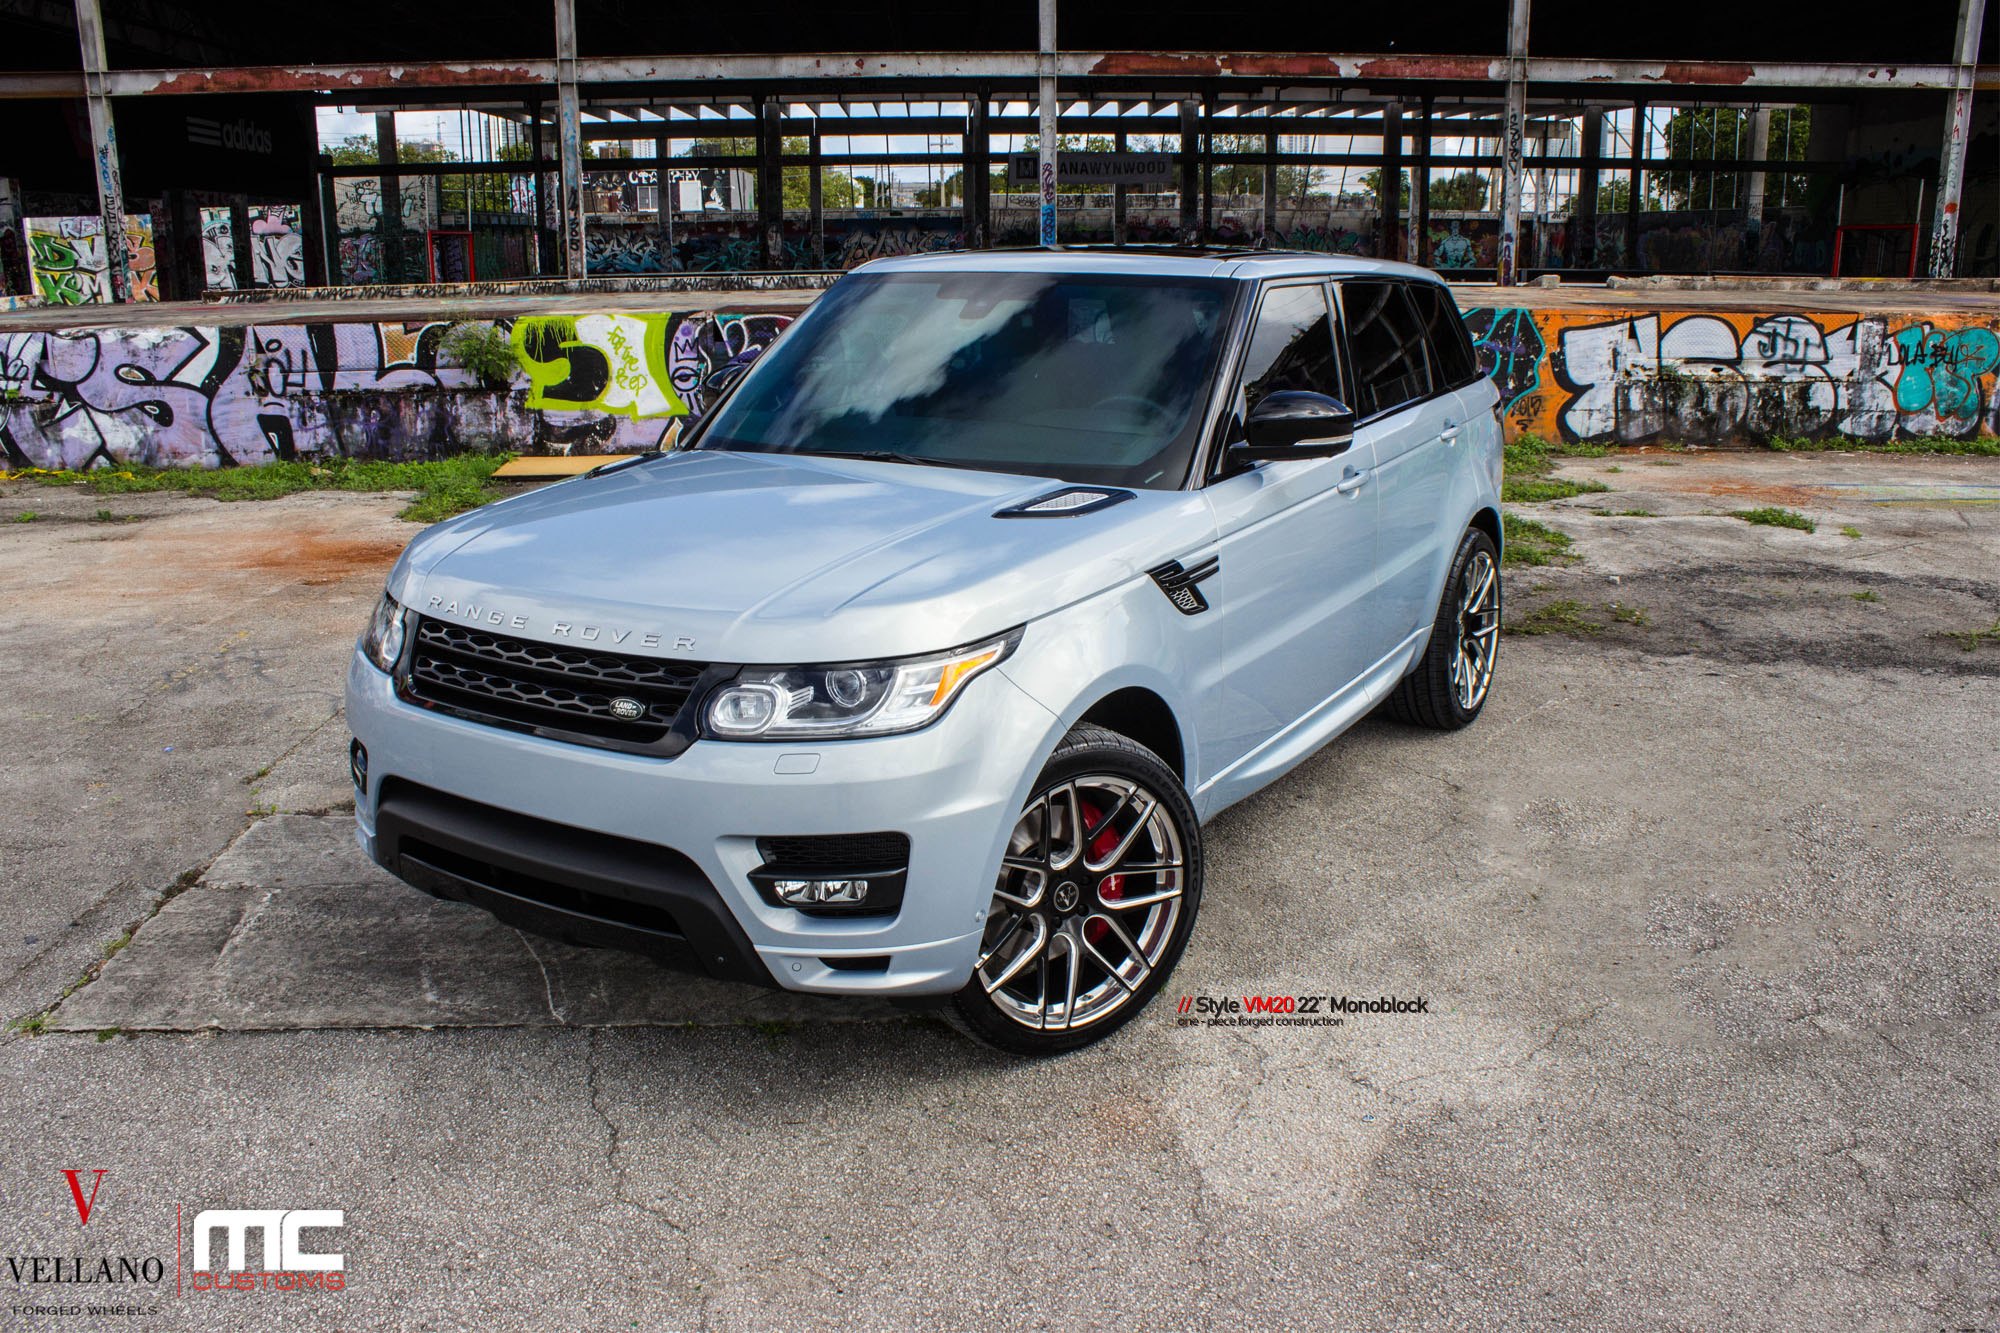 Aftermarket Vented Hood on Blue Range Rover Sport - Photo by Vellano